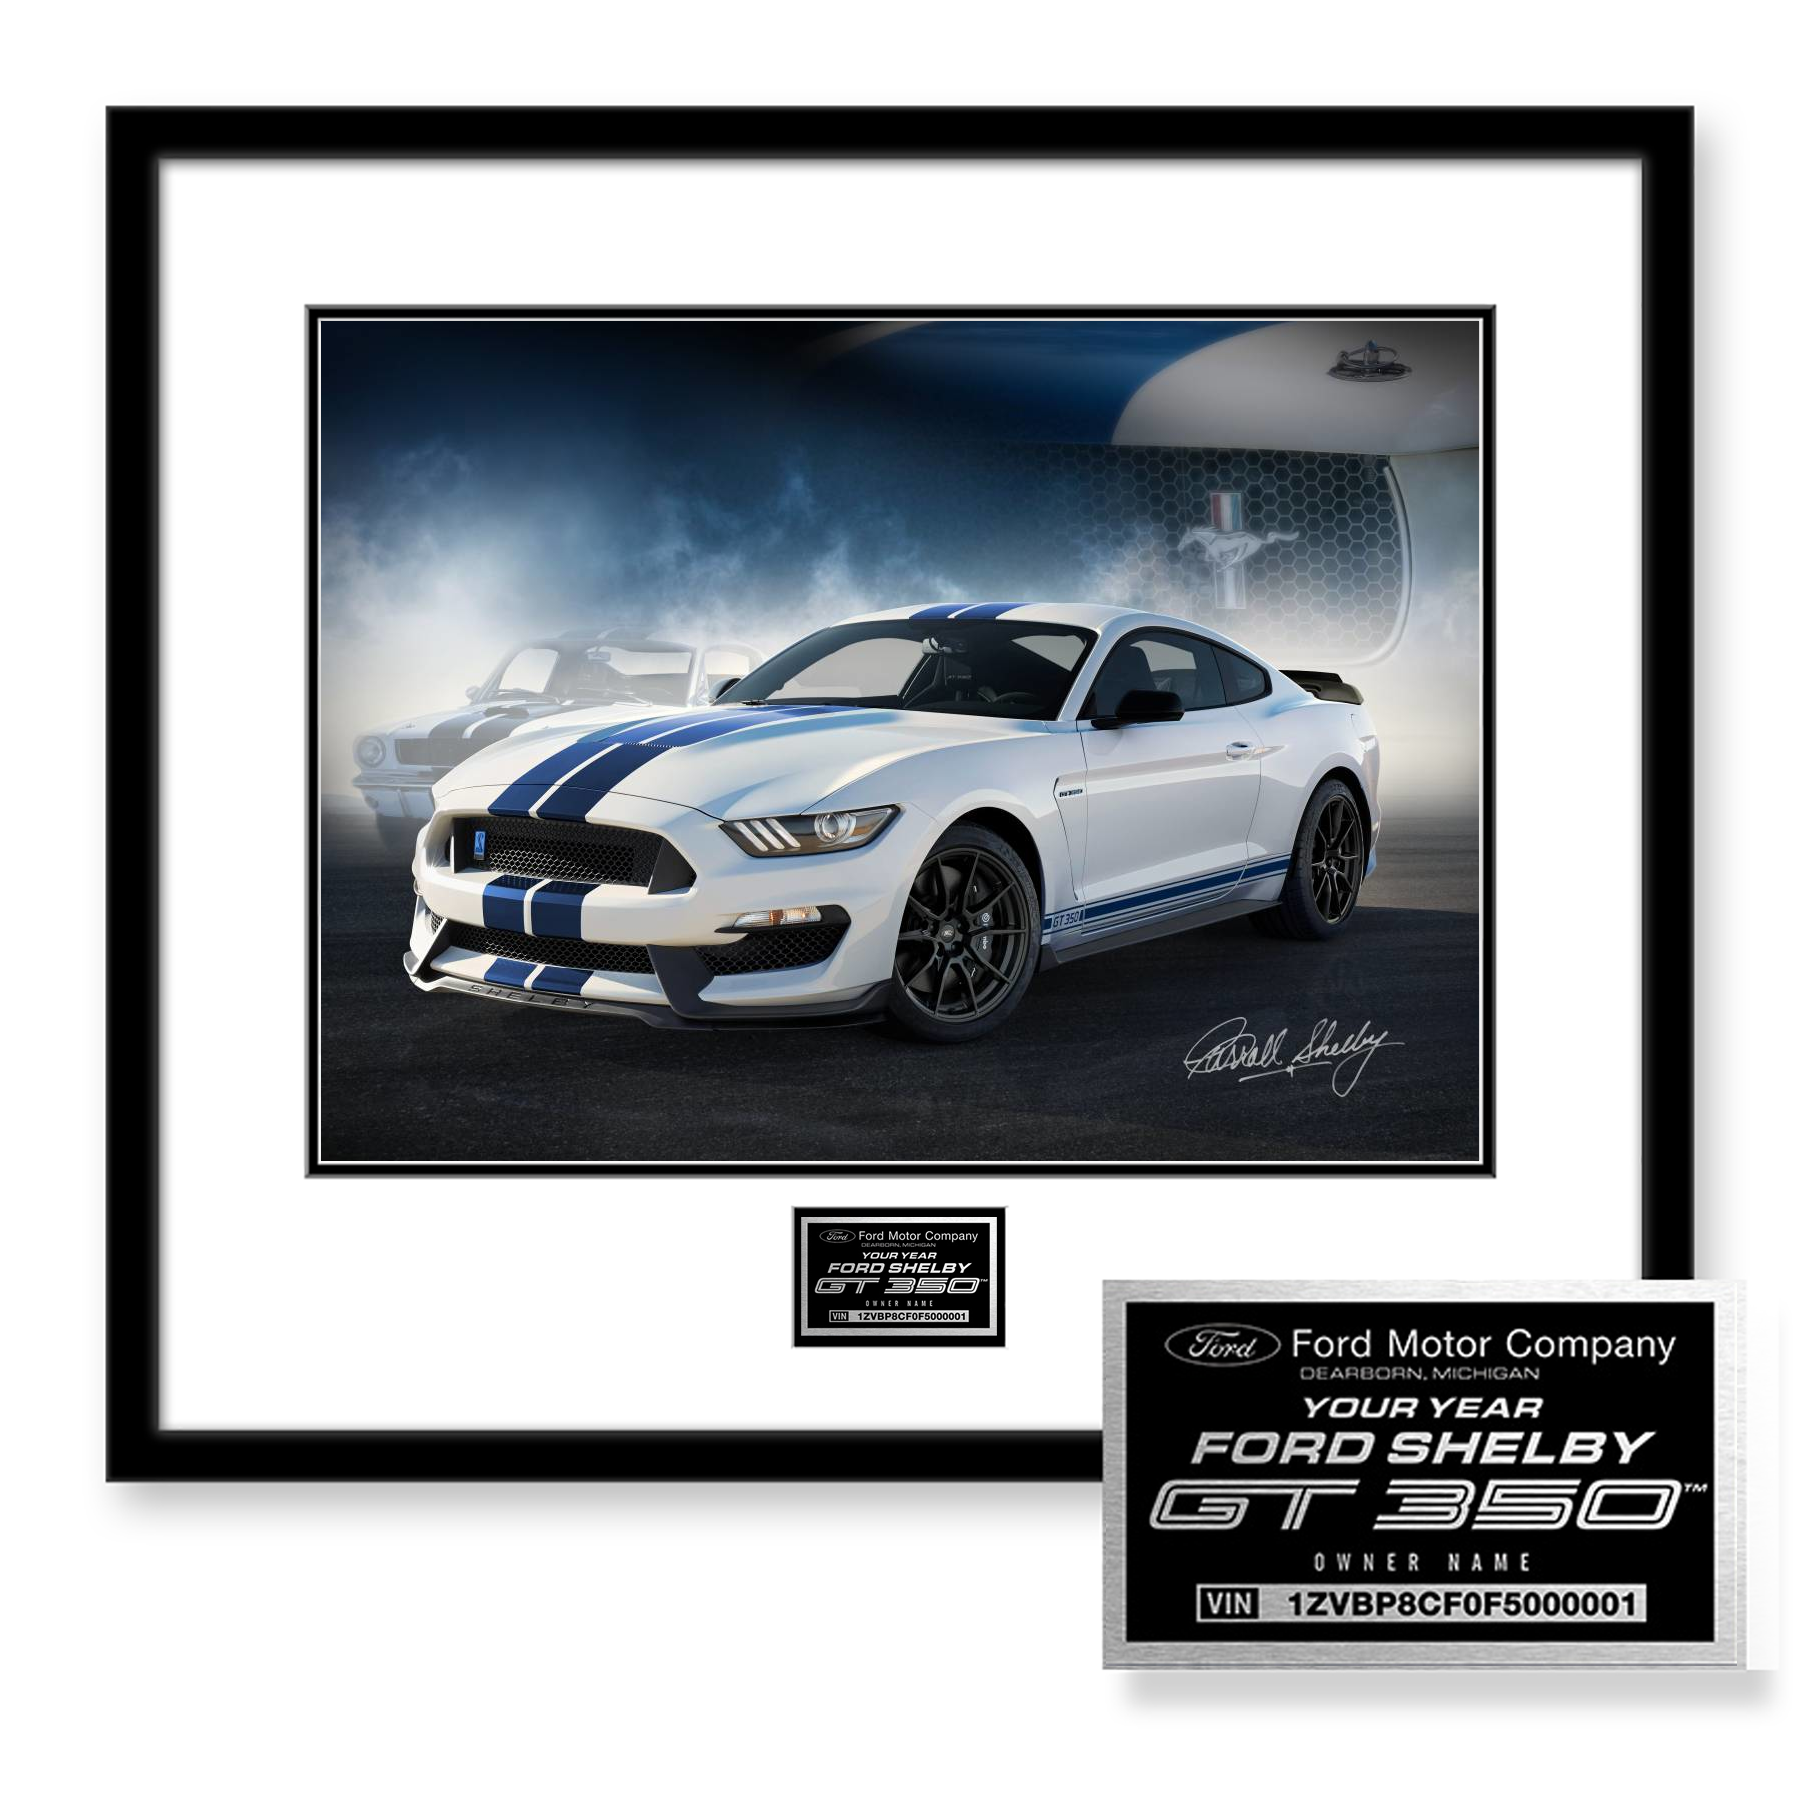 BUILD MY 2015-2020 SHELBY GT350 OWNERS EDITION – Fordimages